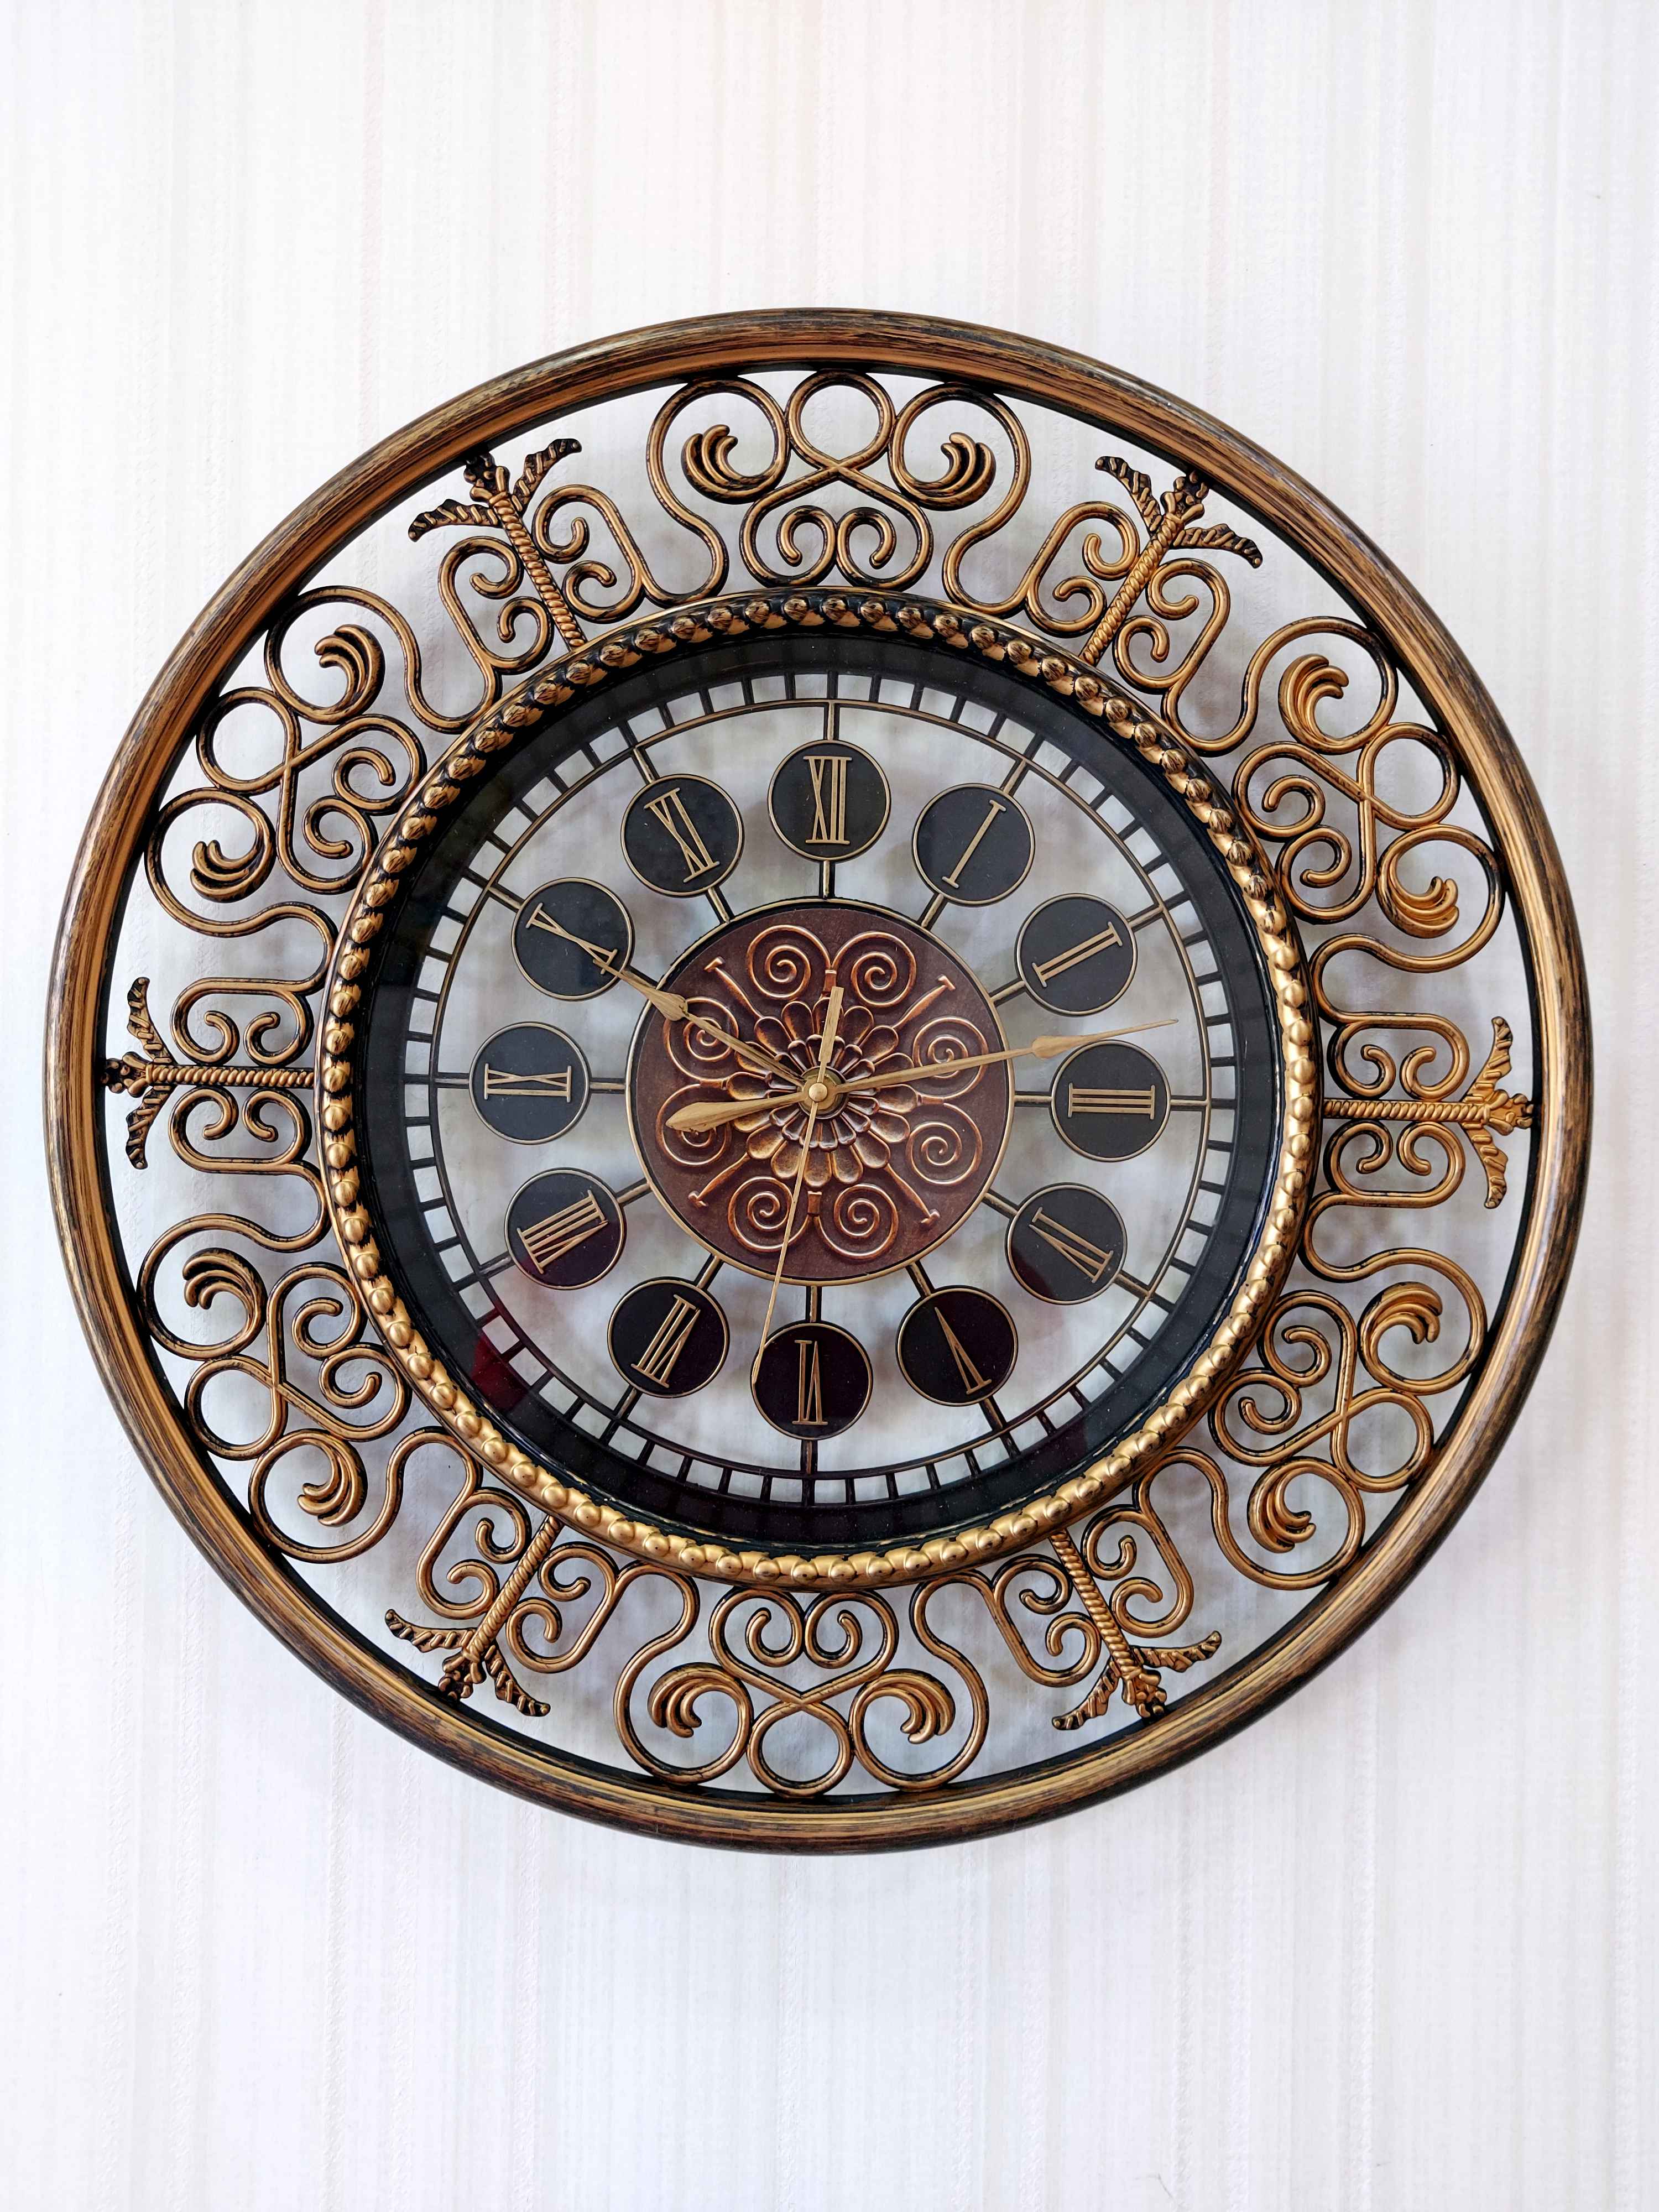 FunkyTradition Designer Wall Clock, Wall Watch, Wall Décor for Home Office Decor and Gifts 45 CM Tall